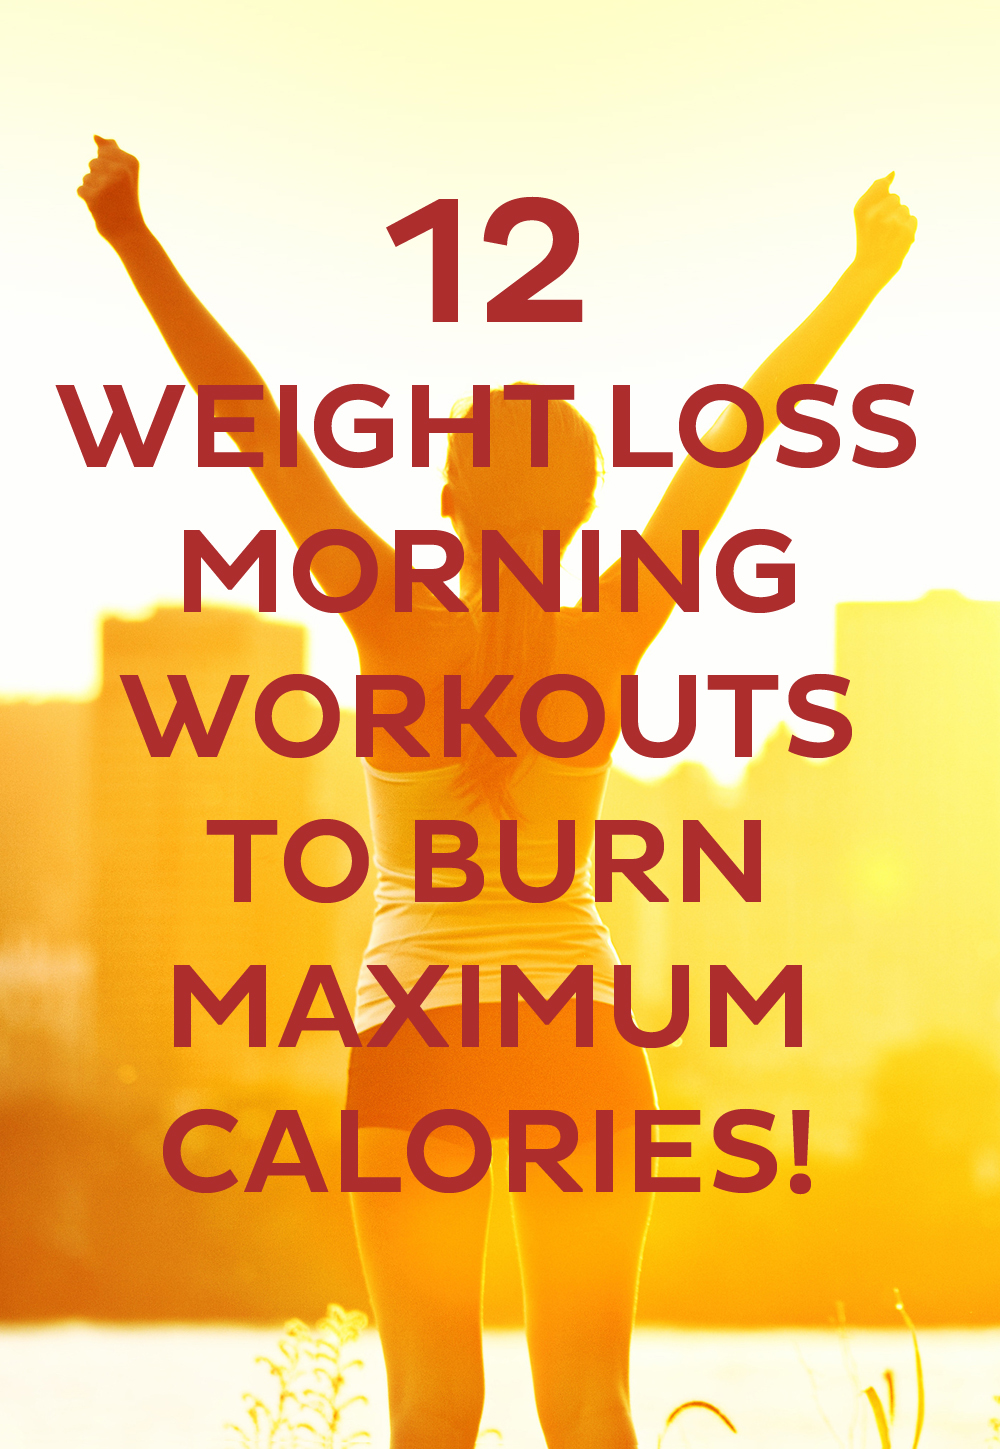 12 Weight Loss Morning Workouts To Burn Maximum Calories! - TrimmedandToned